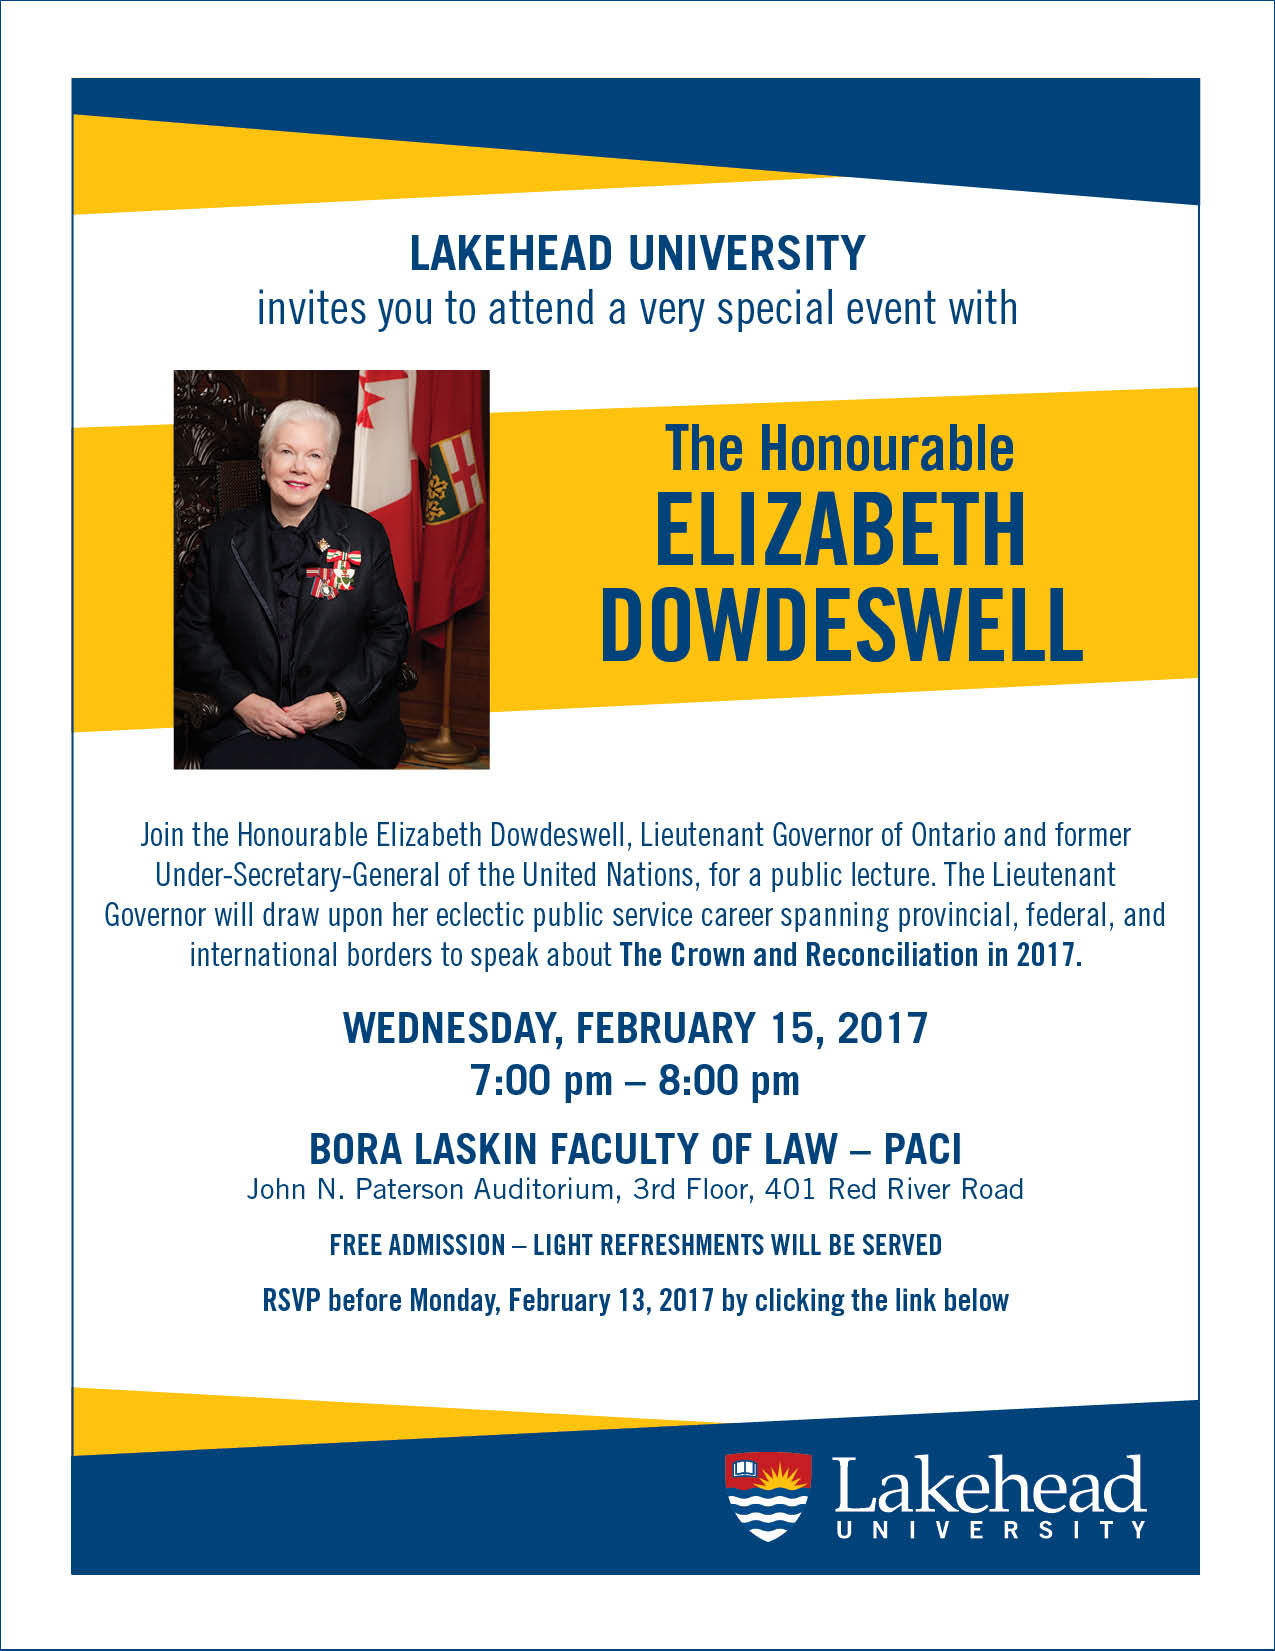 Poster for the upcoming lecture event featuring Elizabeth Dowdeswell